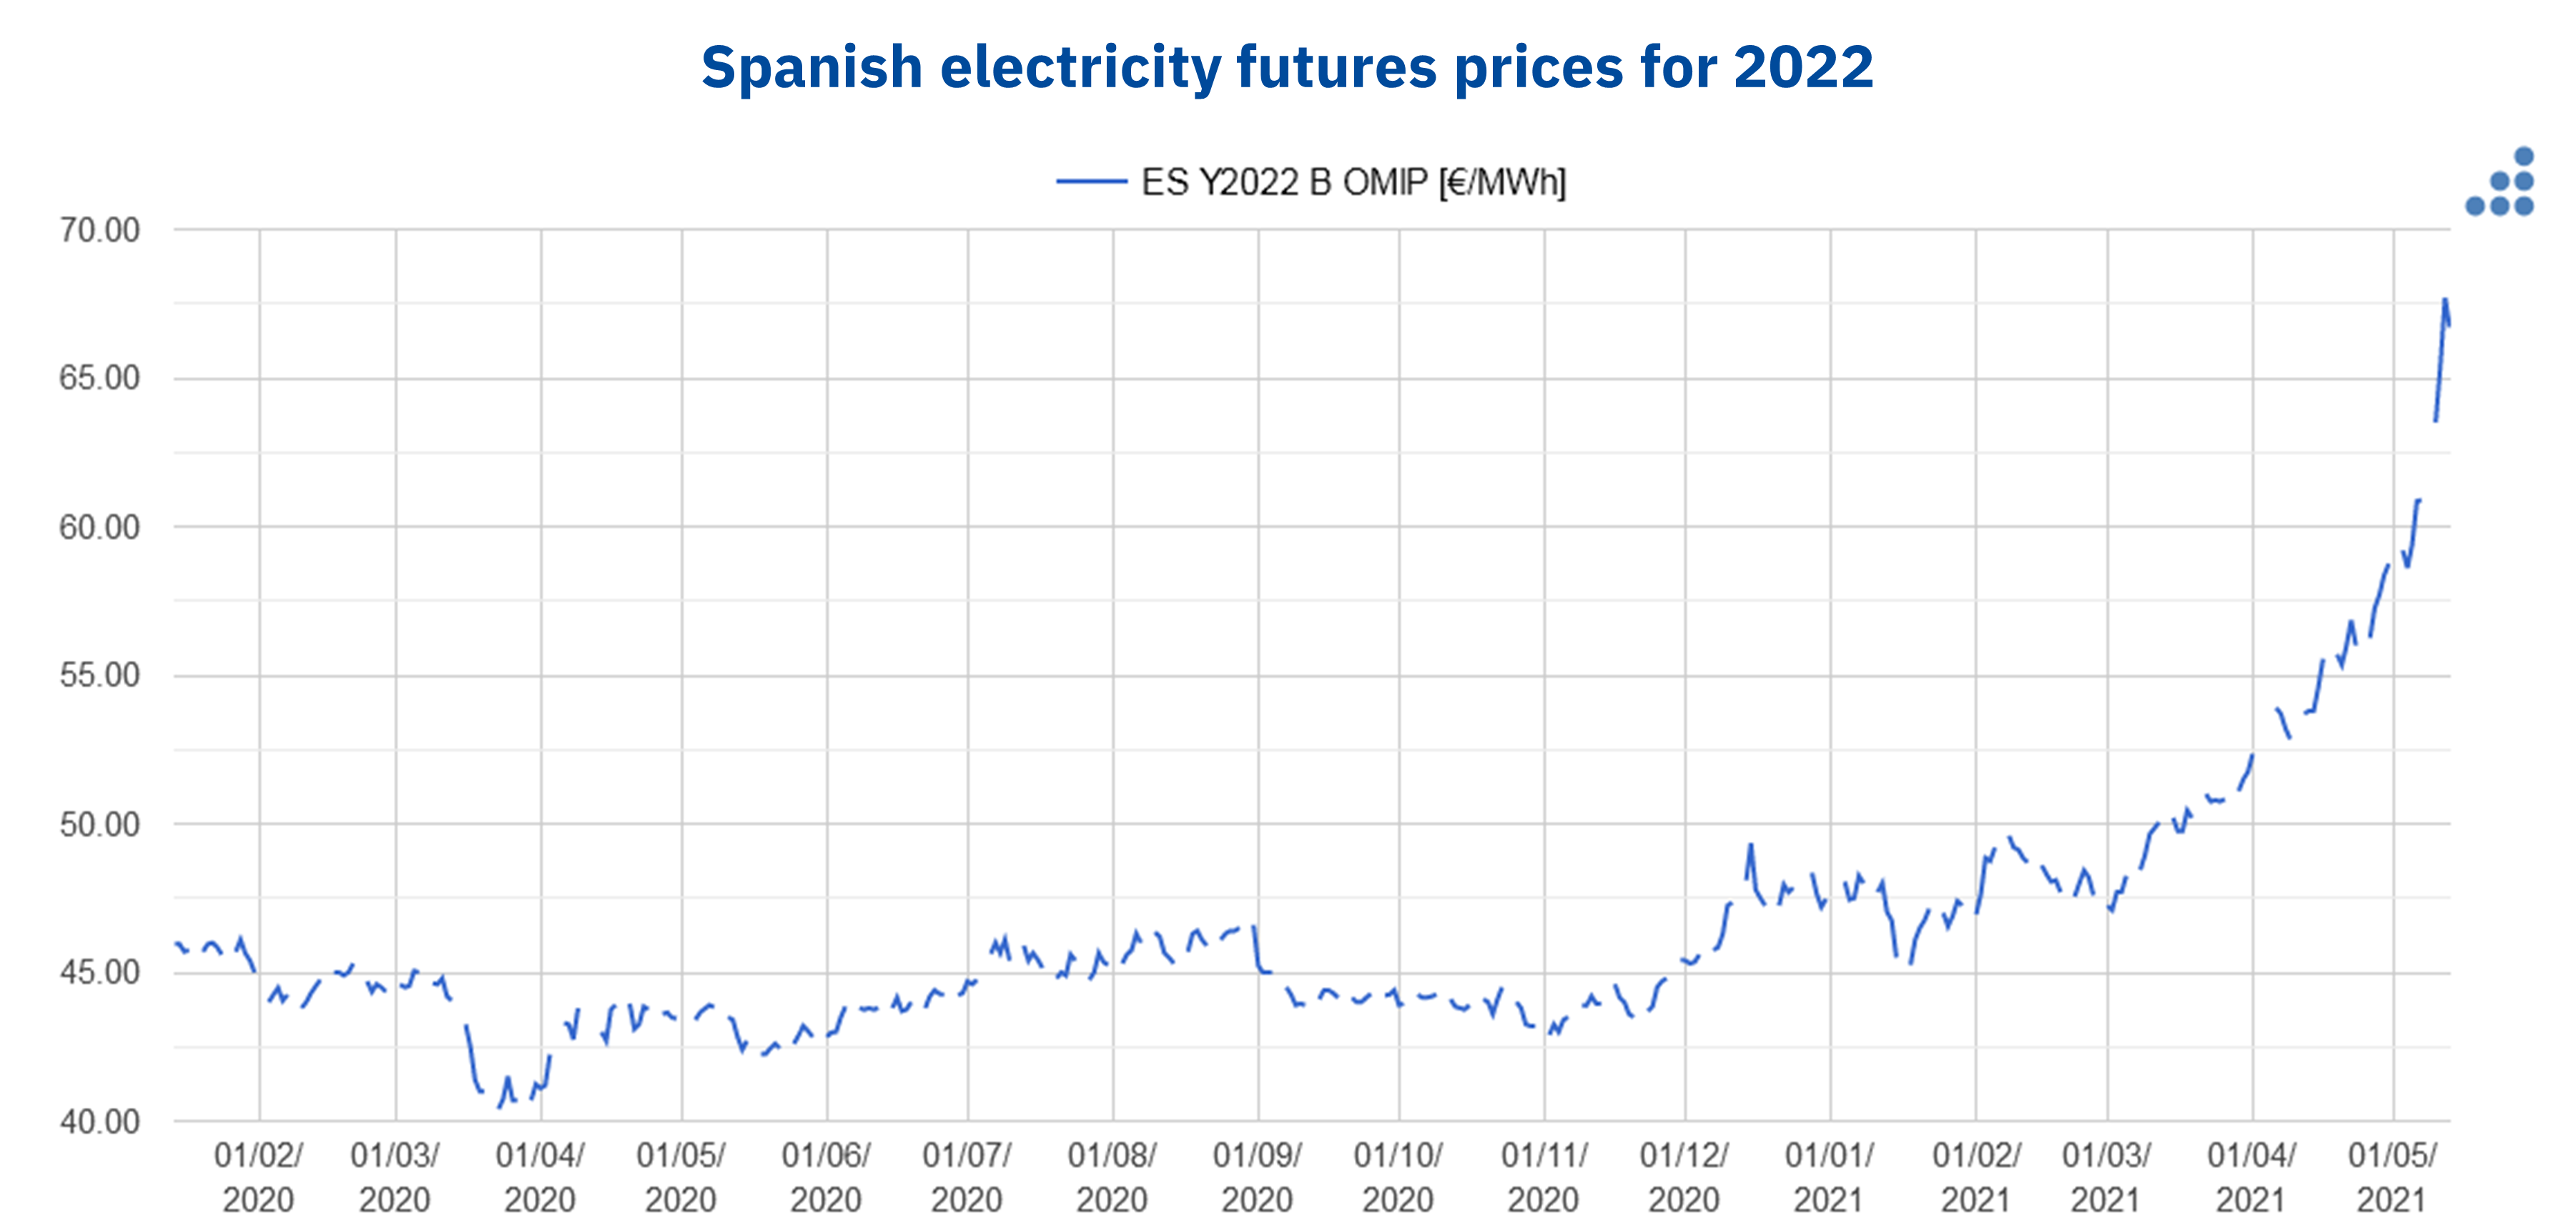 AleaSoft - Spain OMIP electricity futures prices